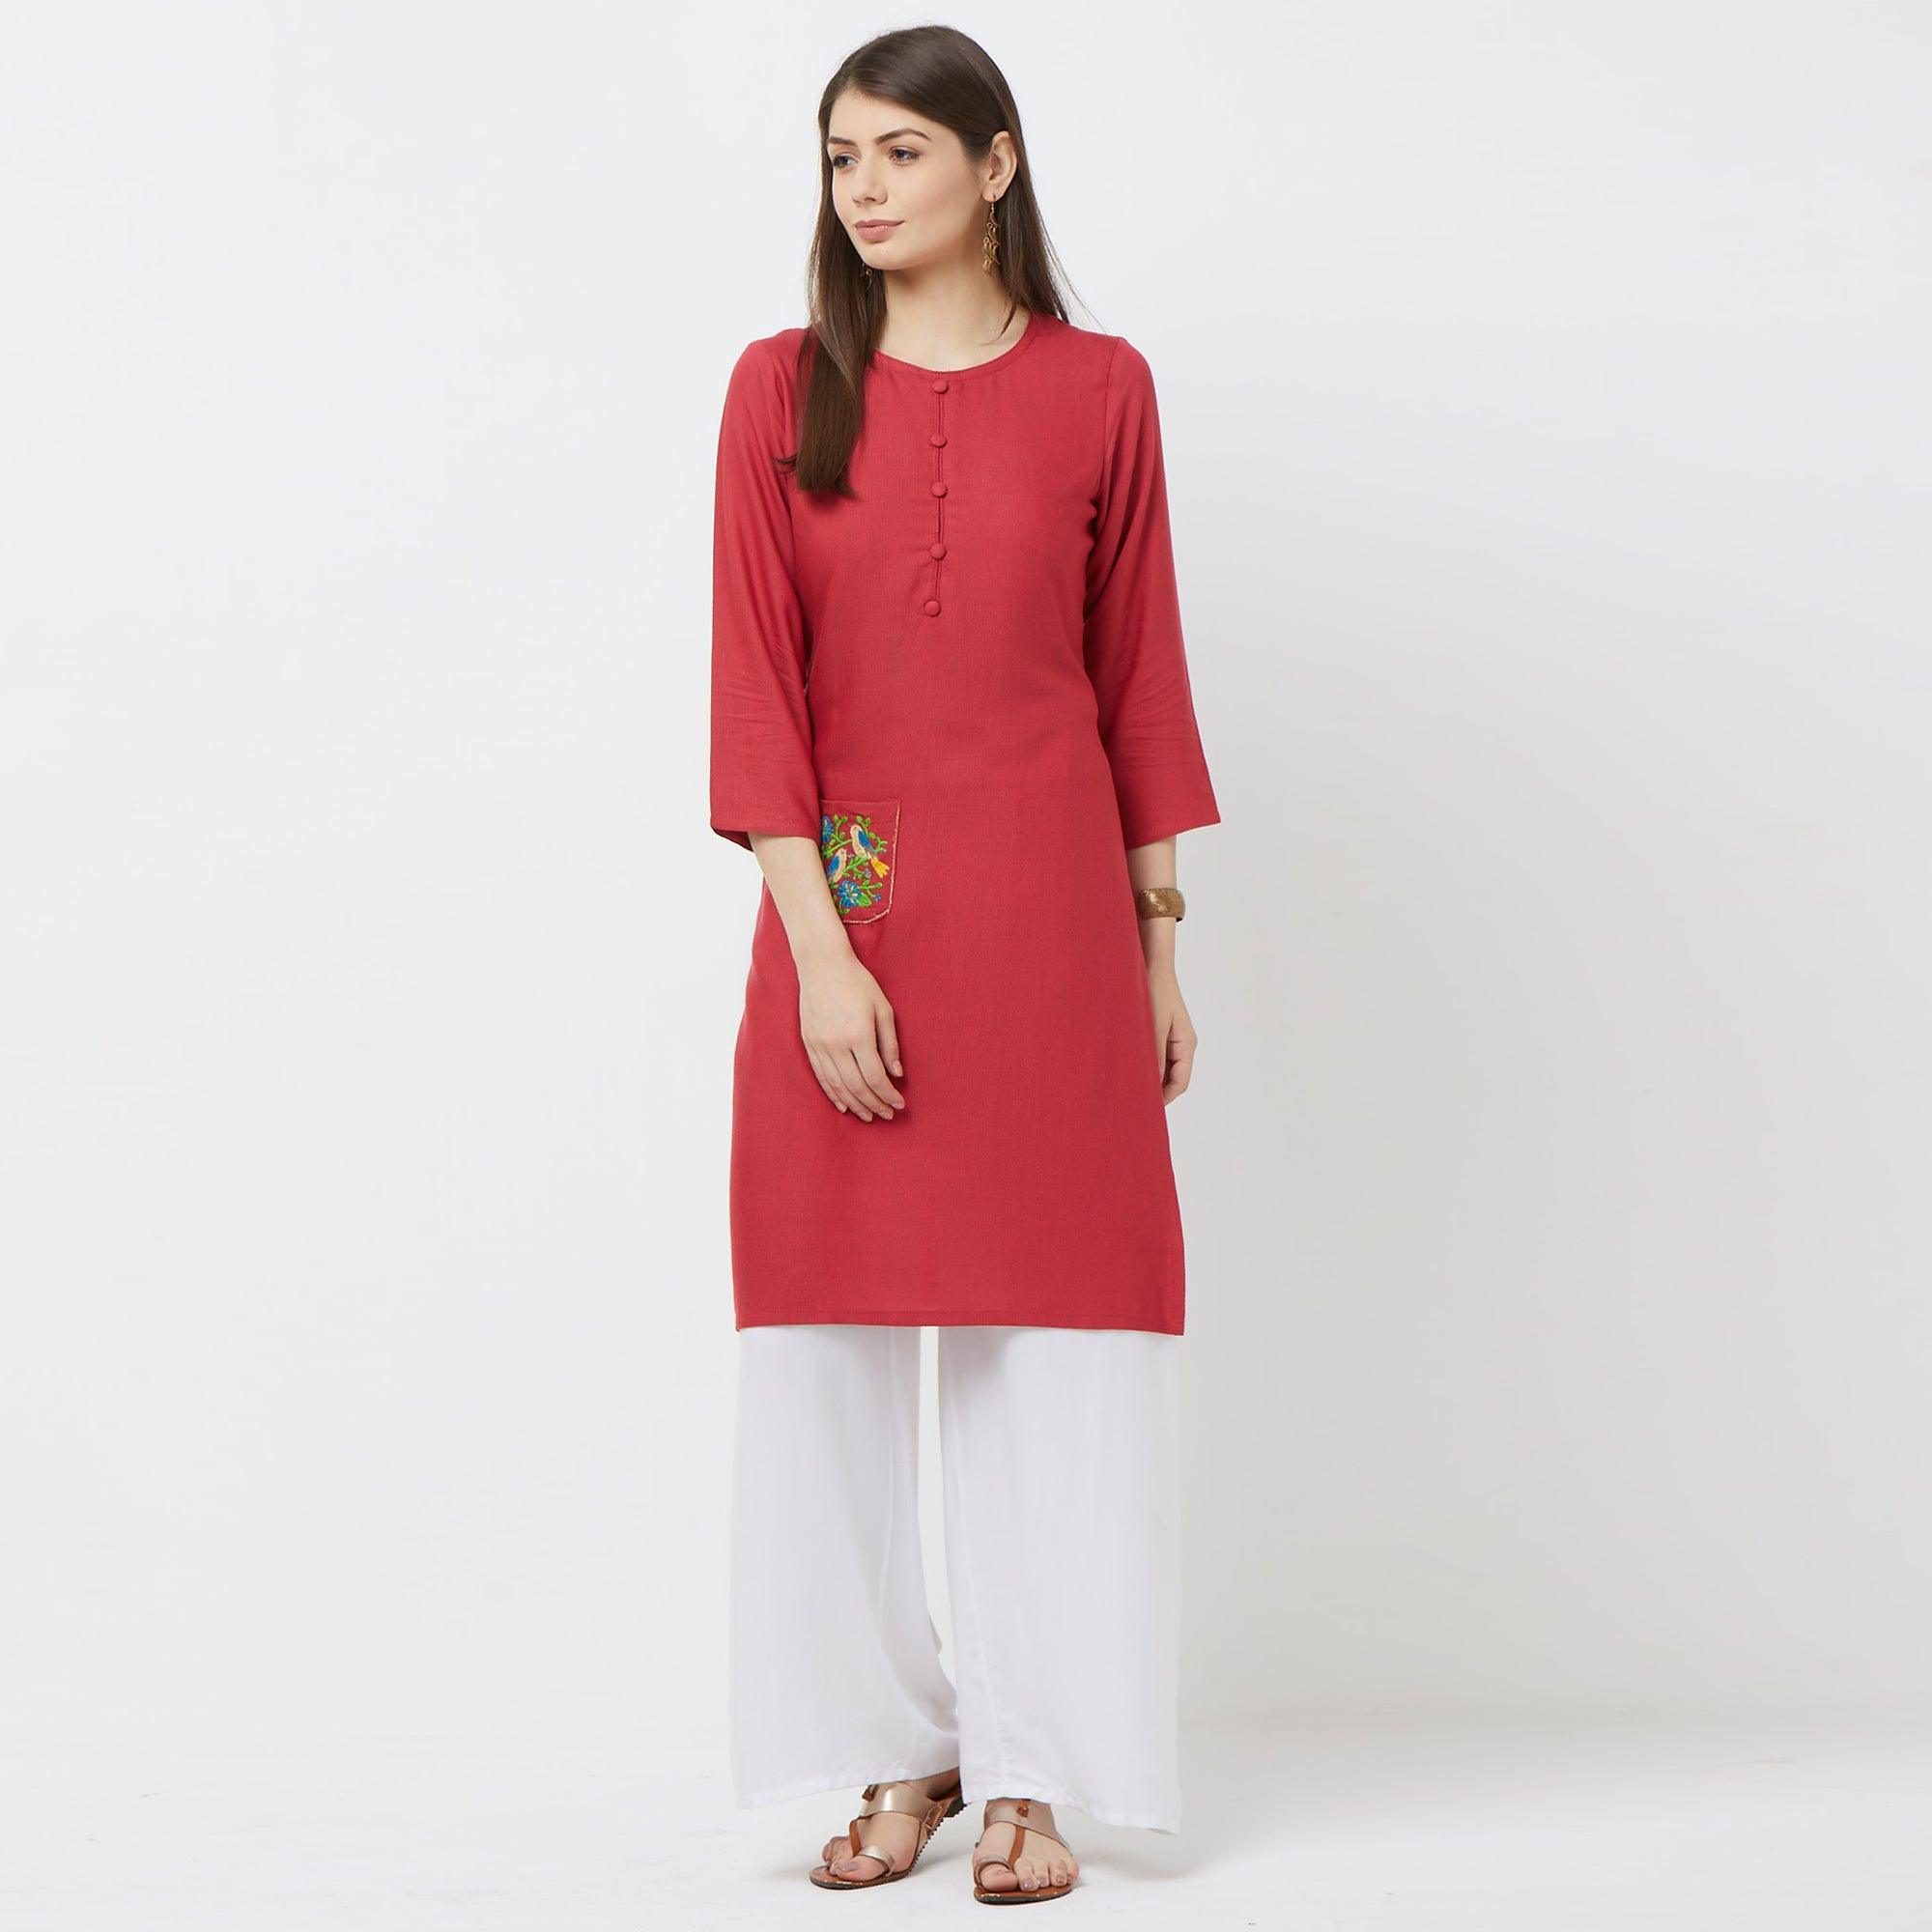 Appealing Pink Colored Casual Embroidered Cotton Kurti - Peachmode